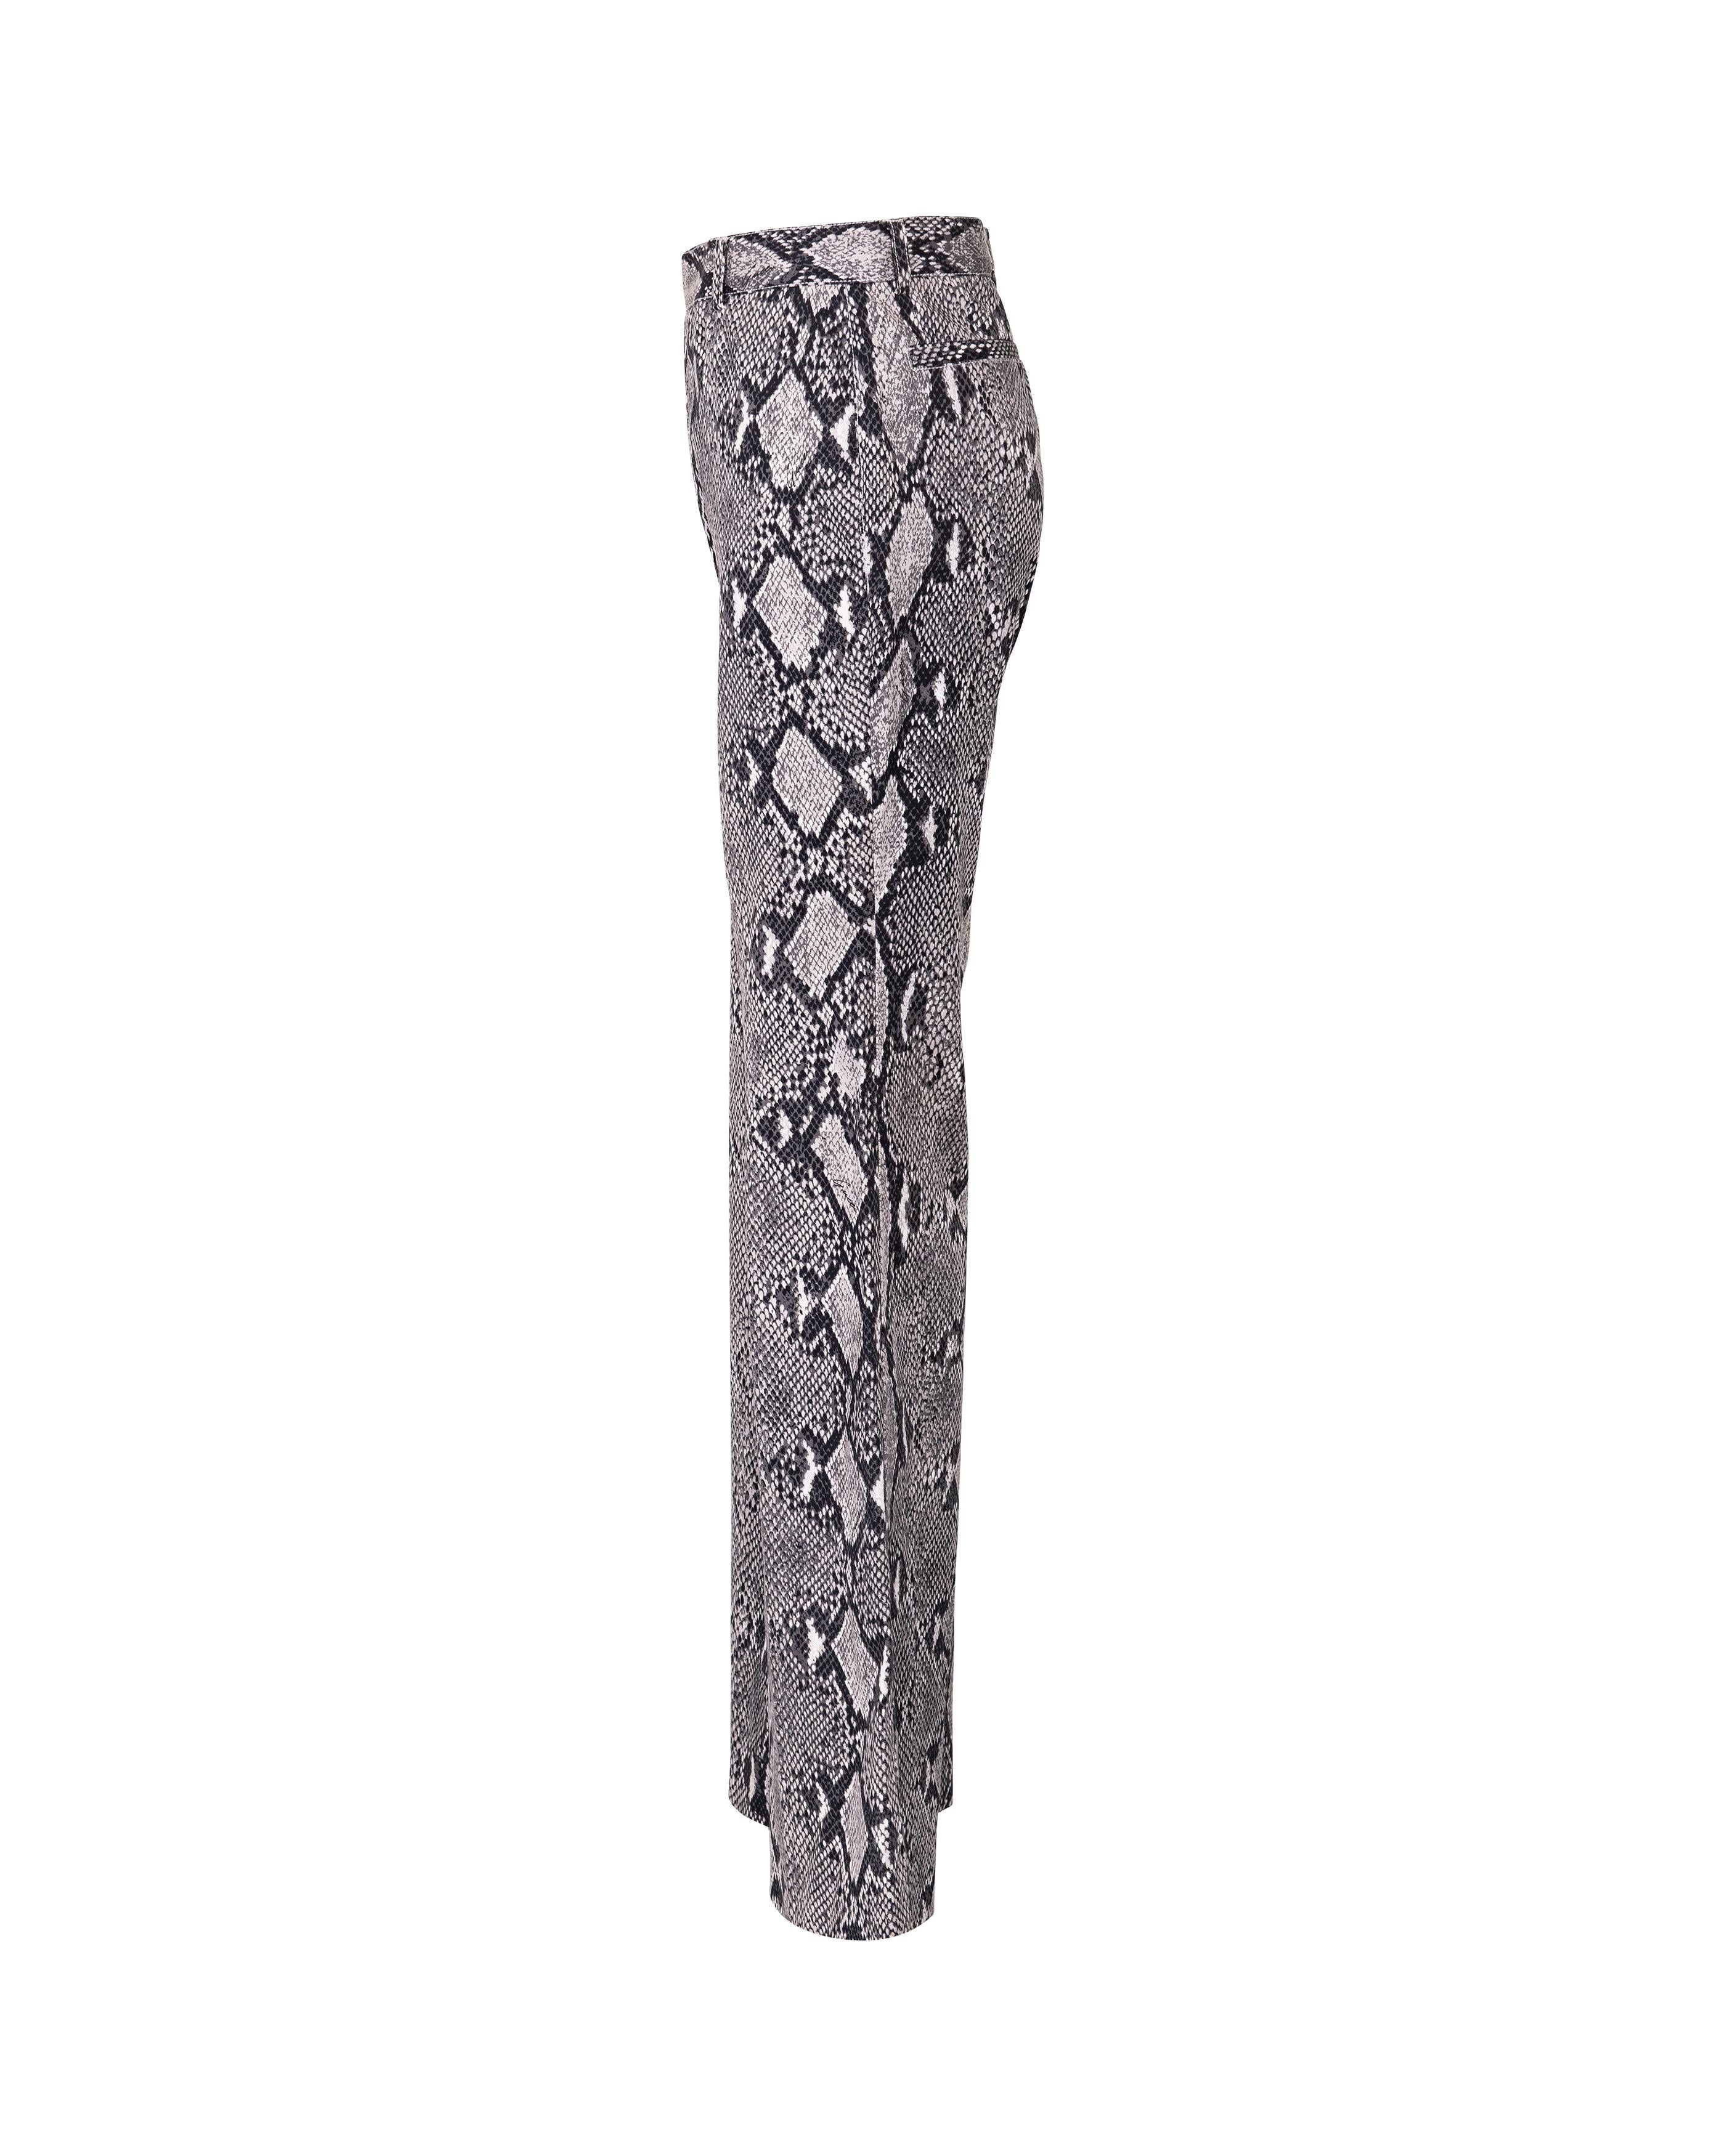 S/S 2000 Gucci by Tom Ford Gray Snakeskin Flare Trousers In Excellent Condition In North Hollywood, CA